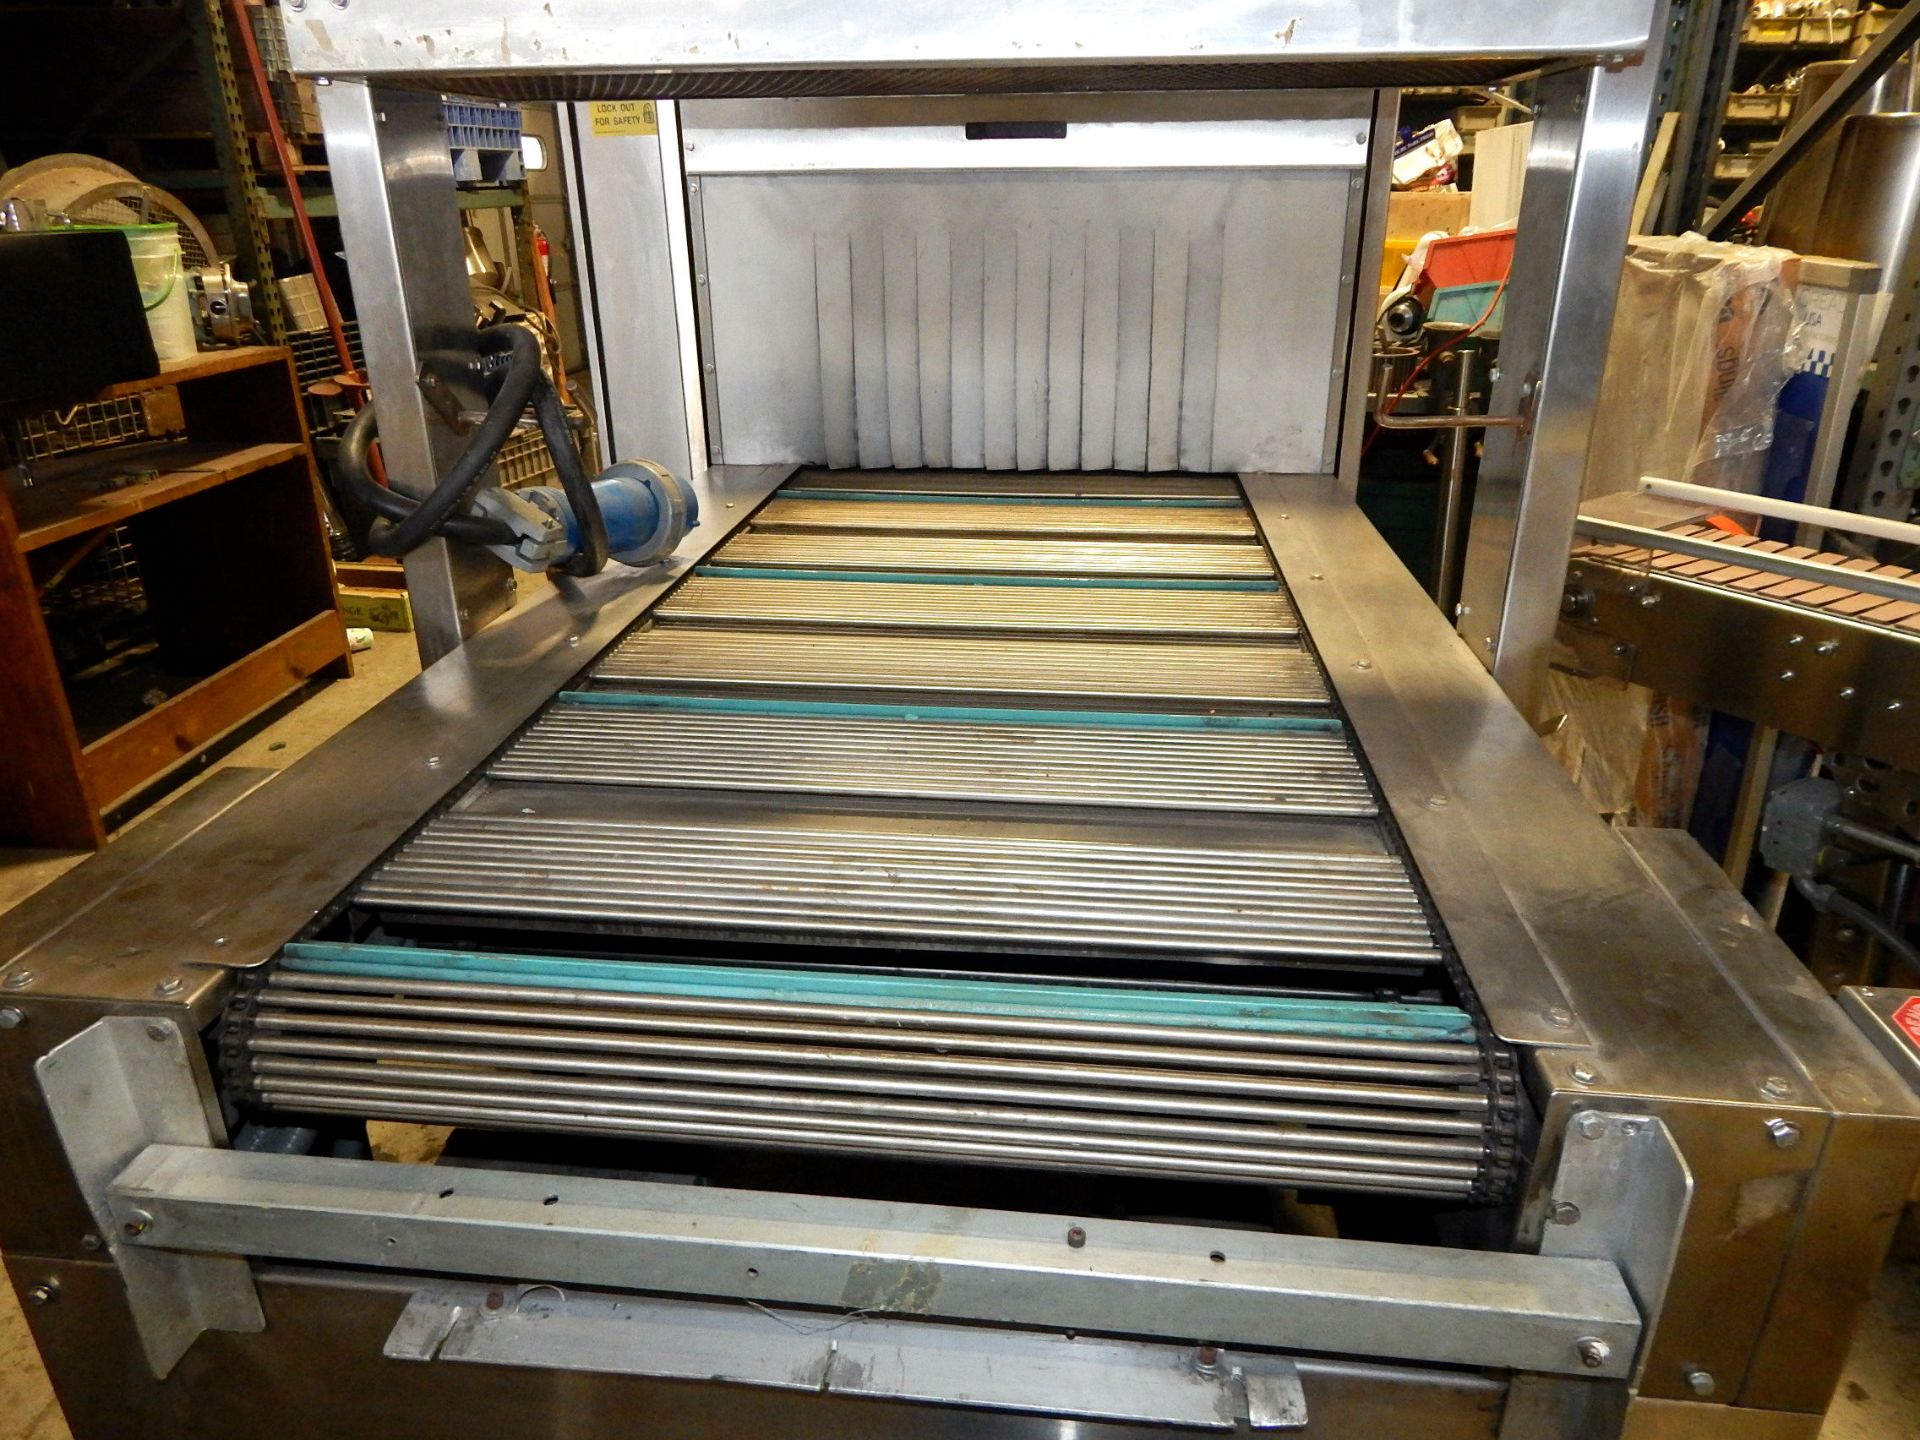 AUTOMATIC ALL STAINLESS STEEL CASE/TRAY OVERWRAPPER BY AUTOMATION PACKAGING INC. - Image 3 of 9